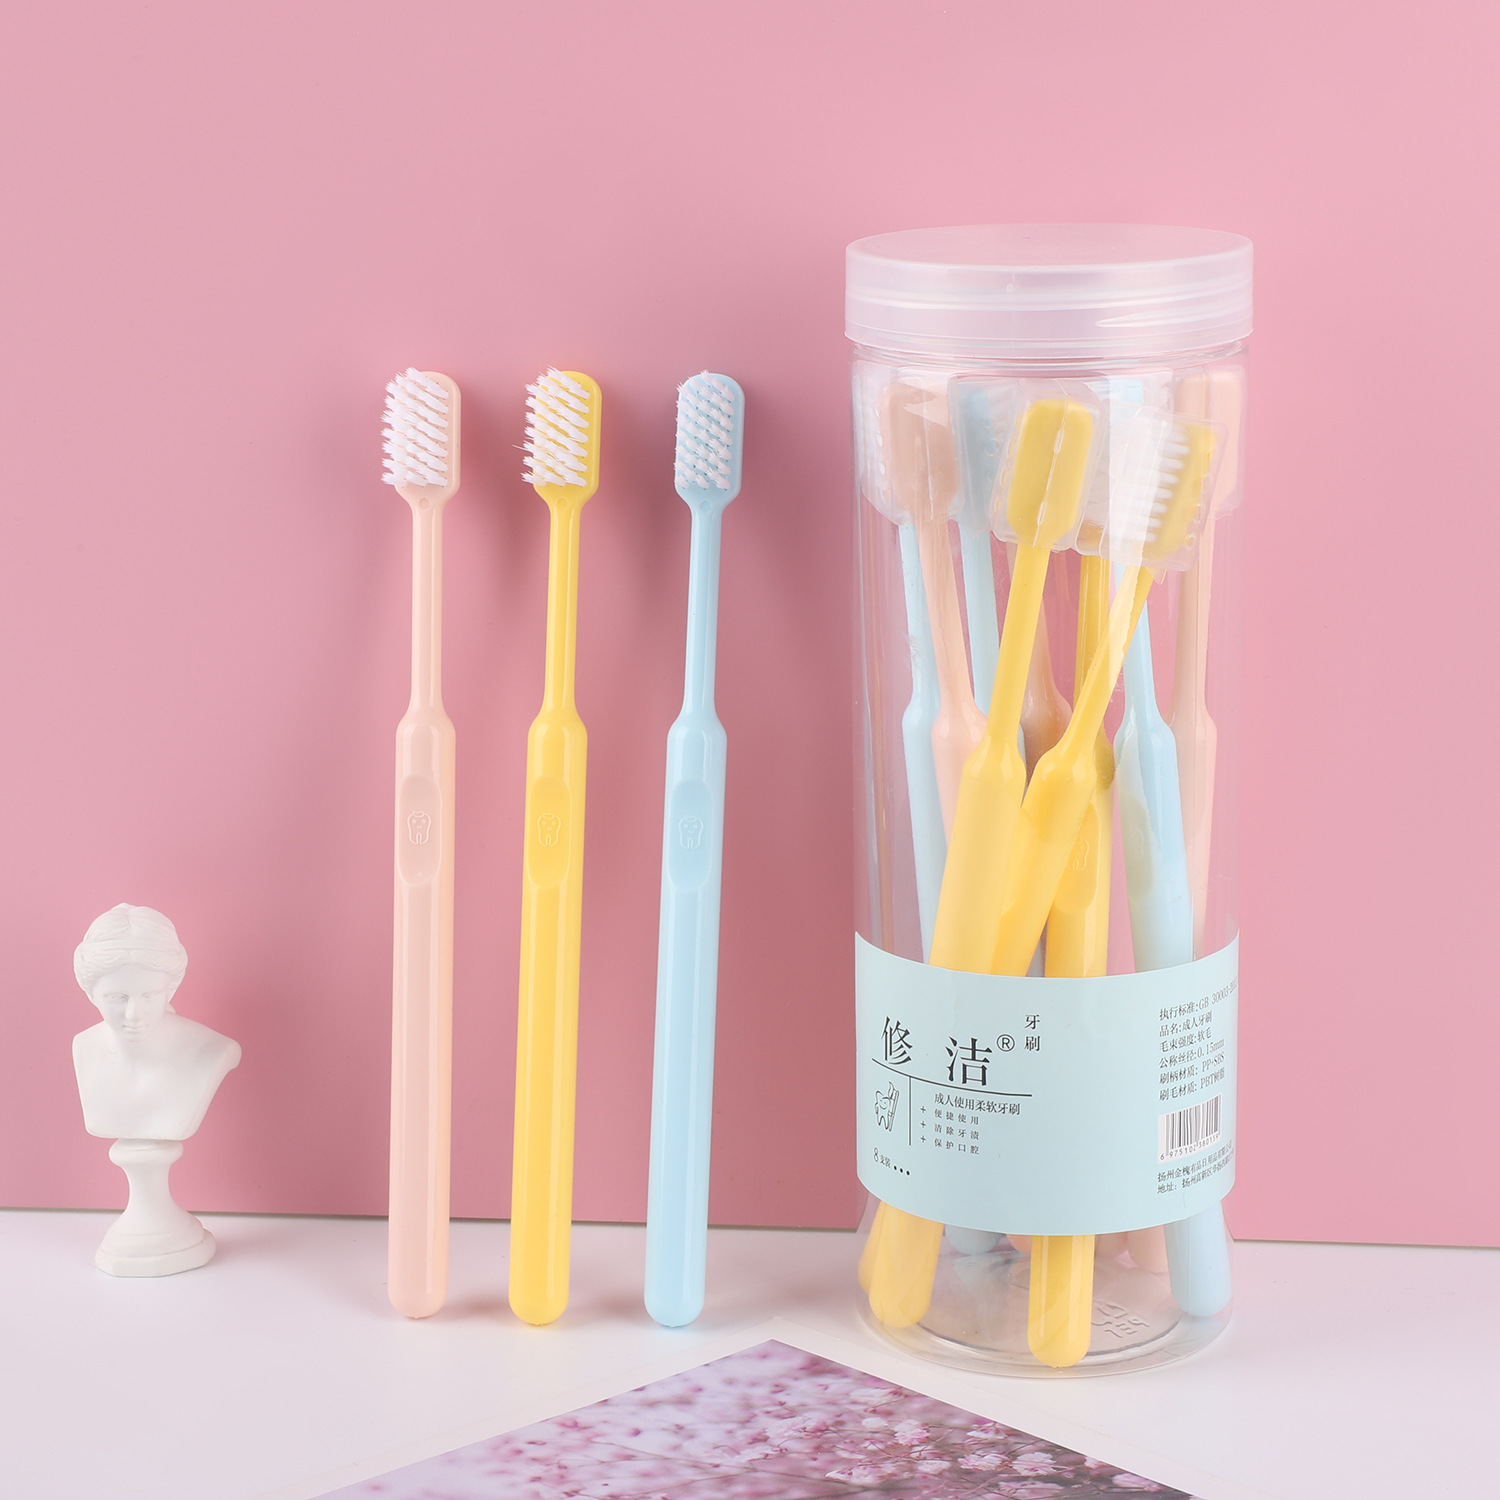 Candy-Colored Smiling Face 10 Barrel Soft-Bristle Toothbrush Morandi Travel with Head Cover Family Pack WeChat Hot-Selling